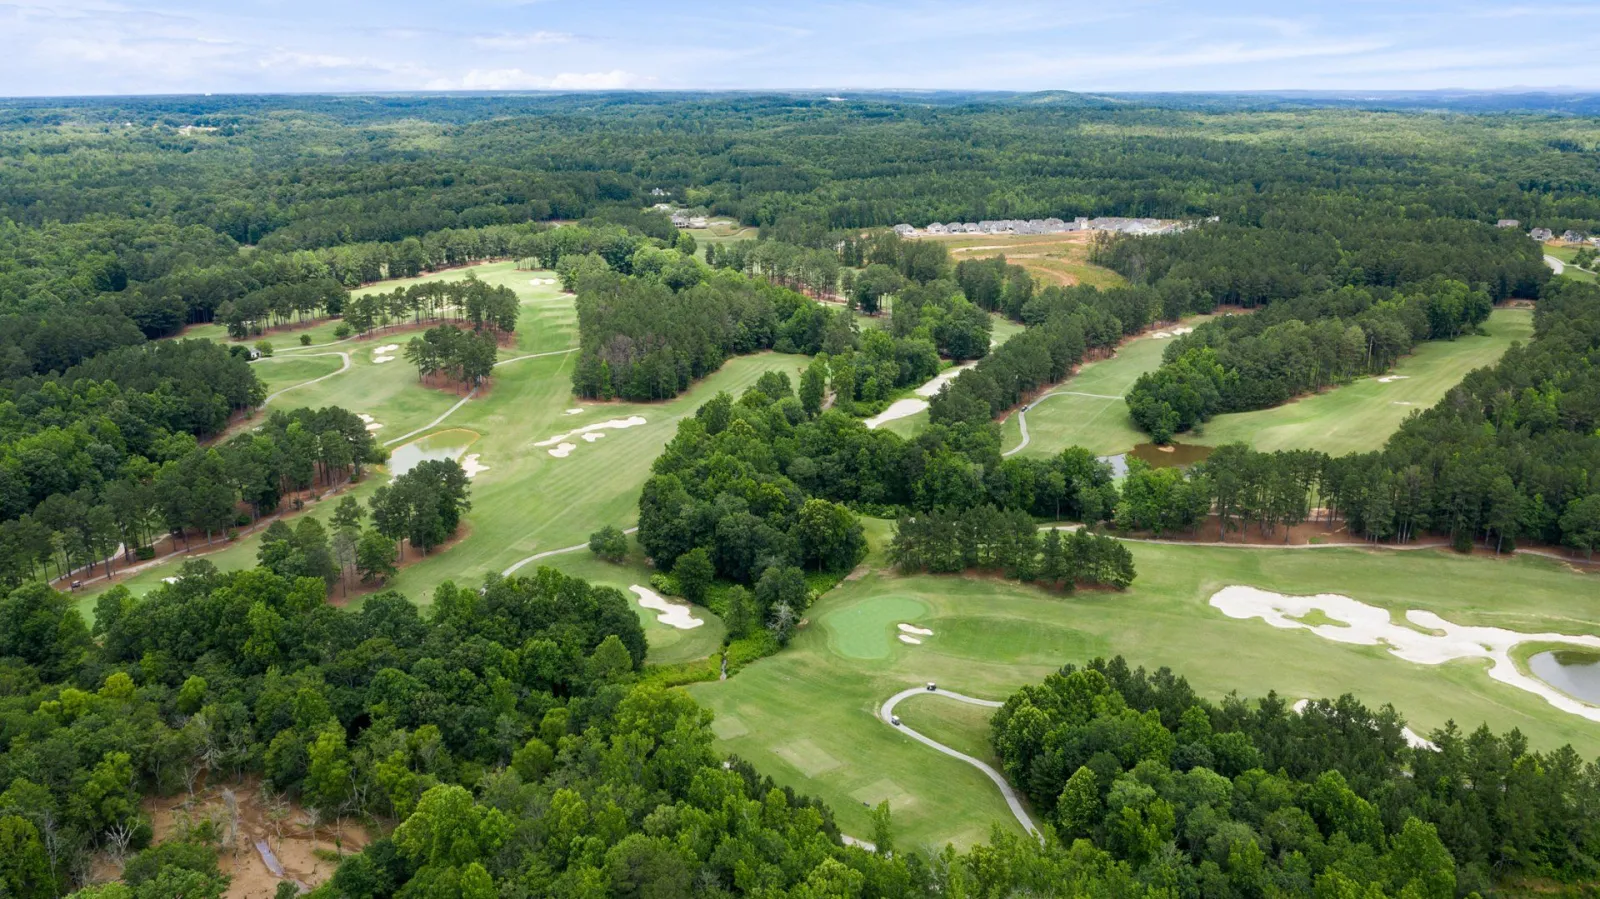 an overhead view of the green golf course at The Georgian